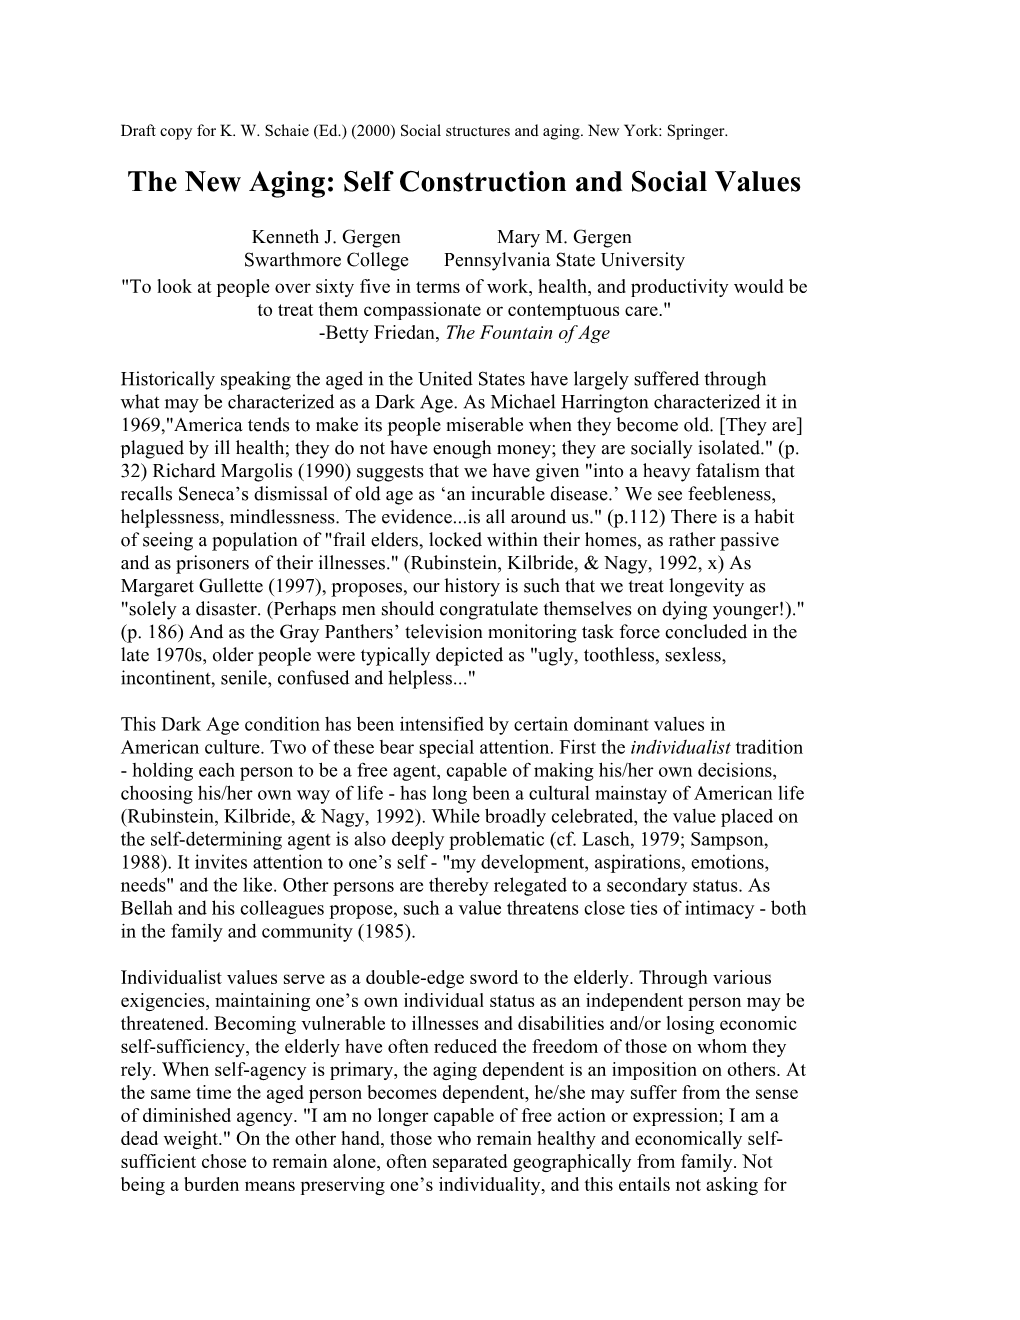 The New Aging: Self Construction and Social Values